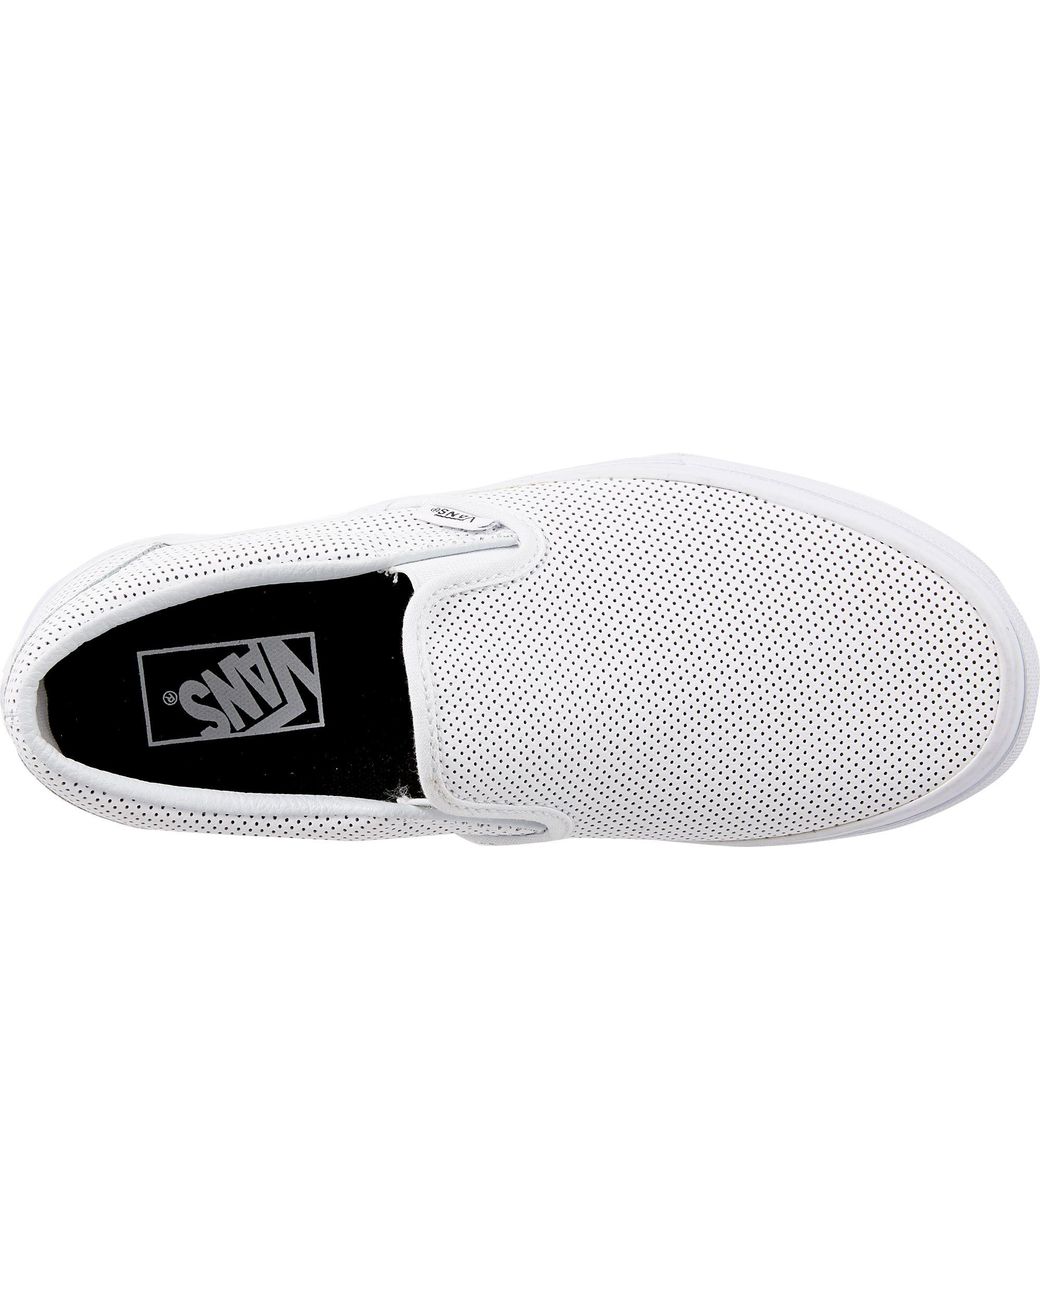 vans chukka white perforated leather shoe